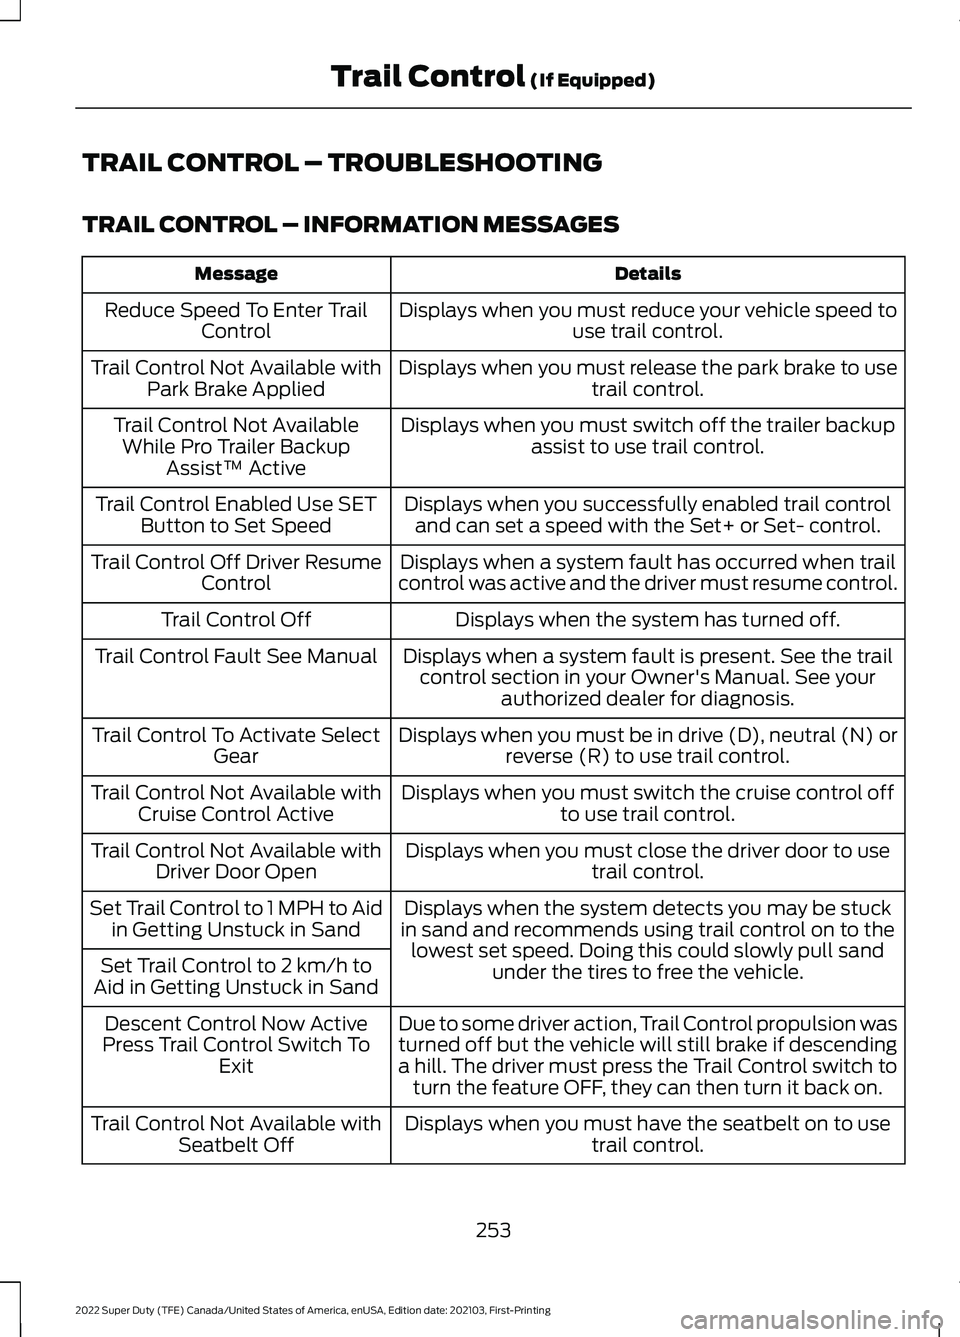 FORD F-250 2022  Owners Manual TRAIL CONTROL – TROUBLESHOOTING
TRAIL CONTROL – INFORMATION MESSAGES
Details
Message
Displays when you must reduce your vehicle speed touse trail control.
Reduce Speed To Enter Trail
Control
Displ